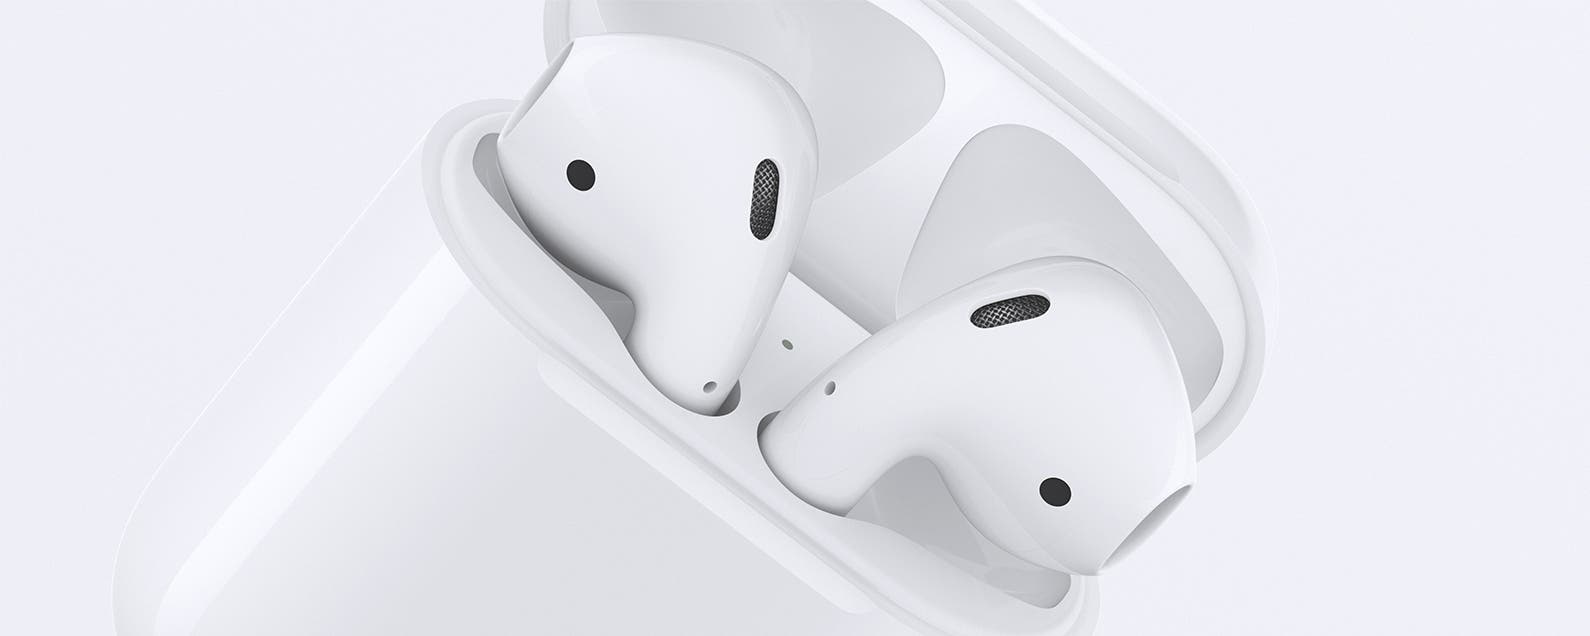 Apple AirPods Guide: How To Connect, Set Up, Charge, & Use AirPod 